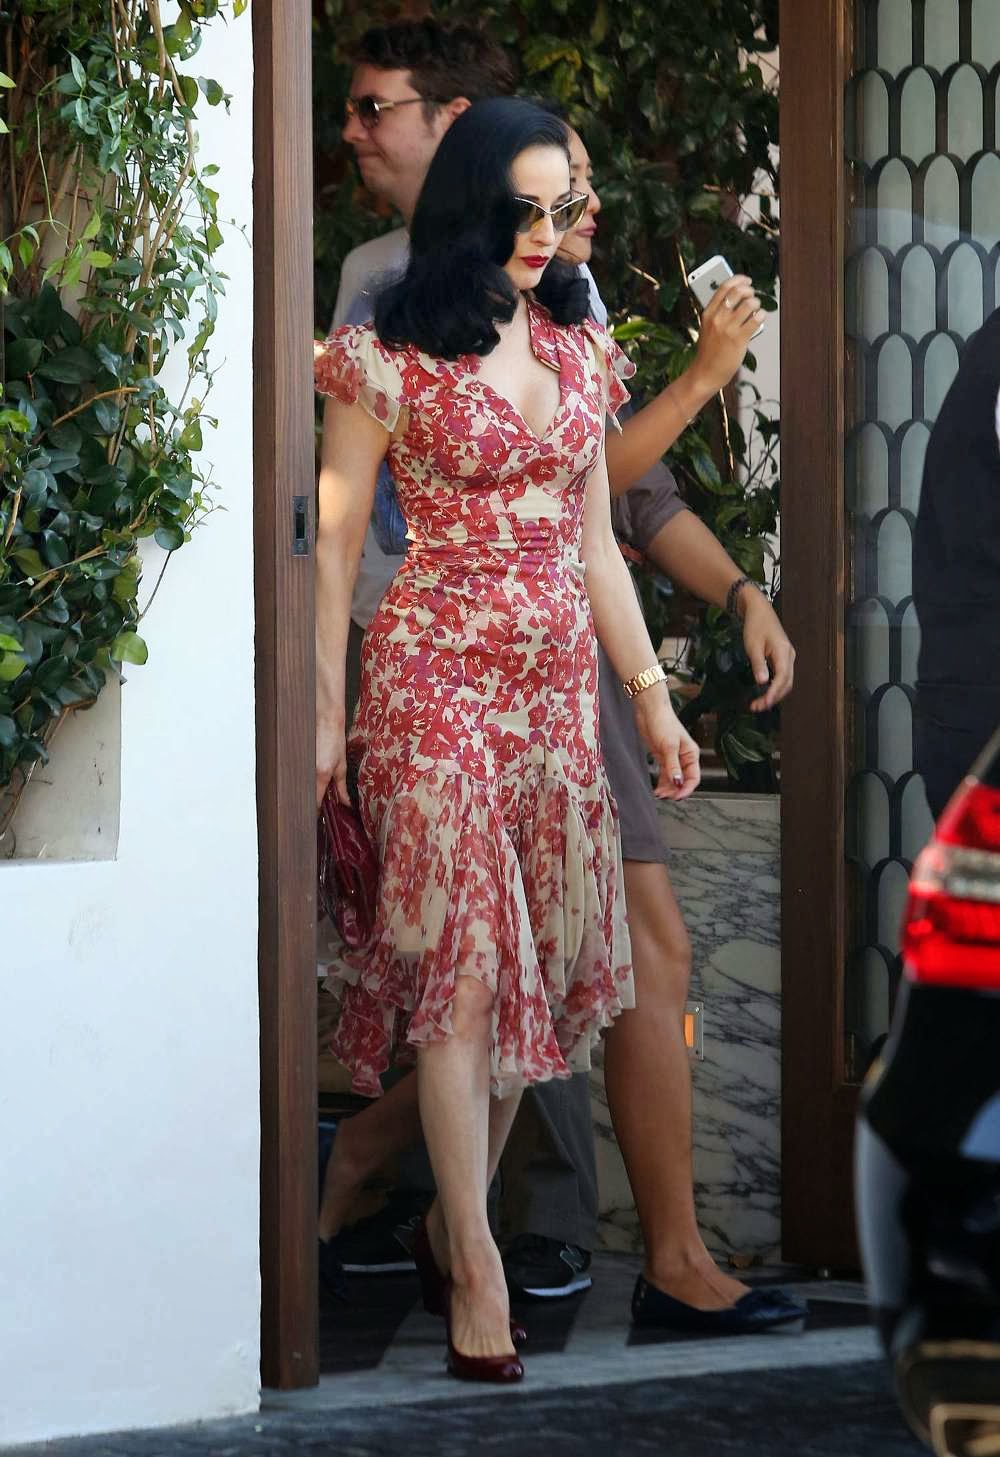 Dita Von Teese Flashing Her Deep Cleavage at Cecconis 